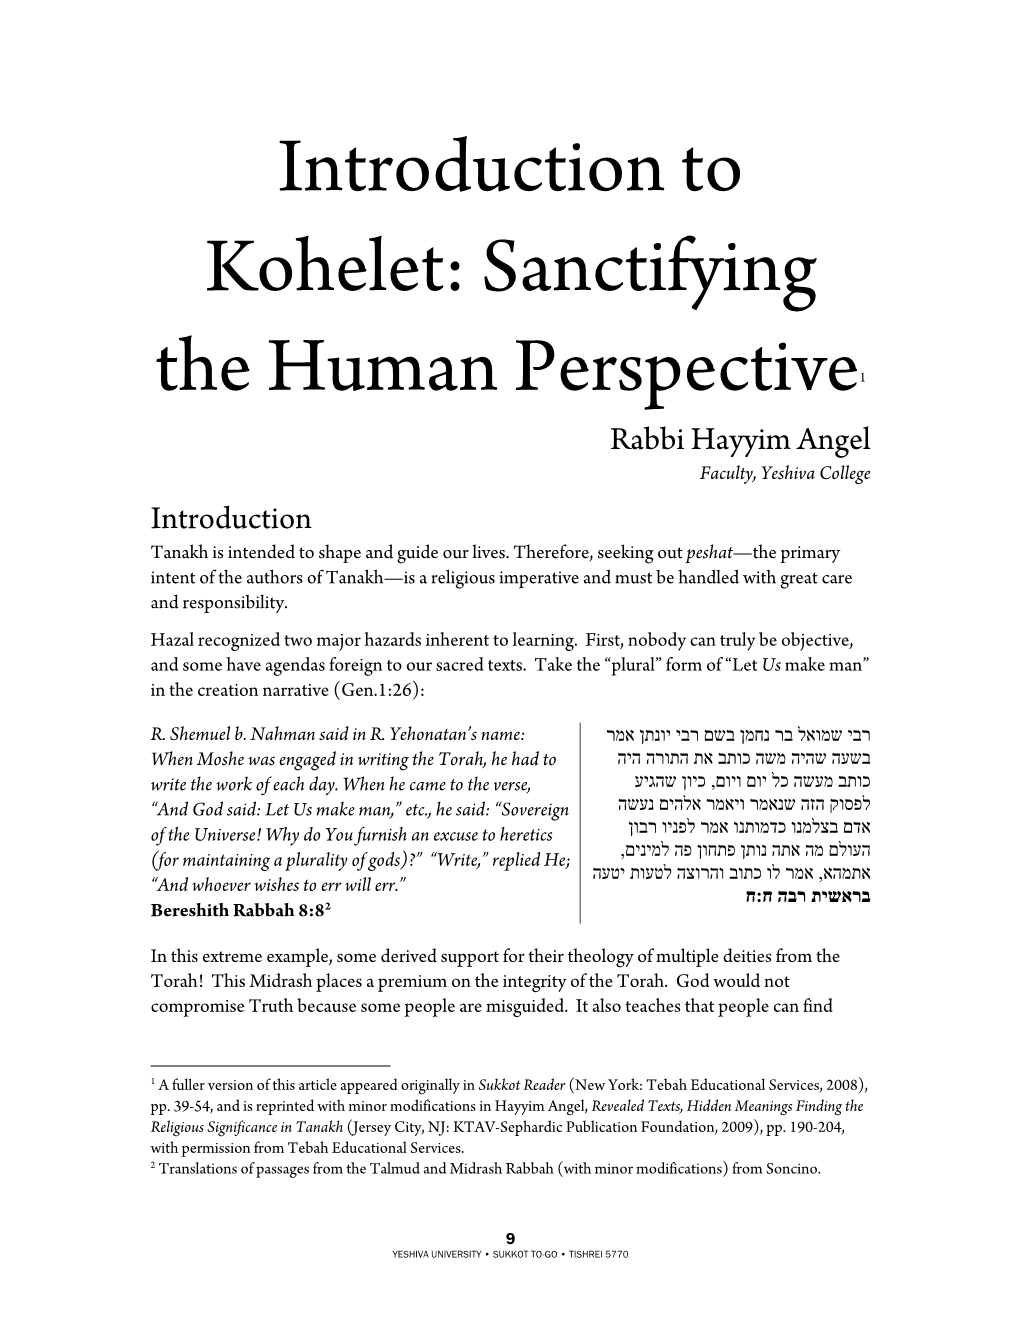 Introduction to Kohelet: Sanctifying the Human Perspective1